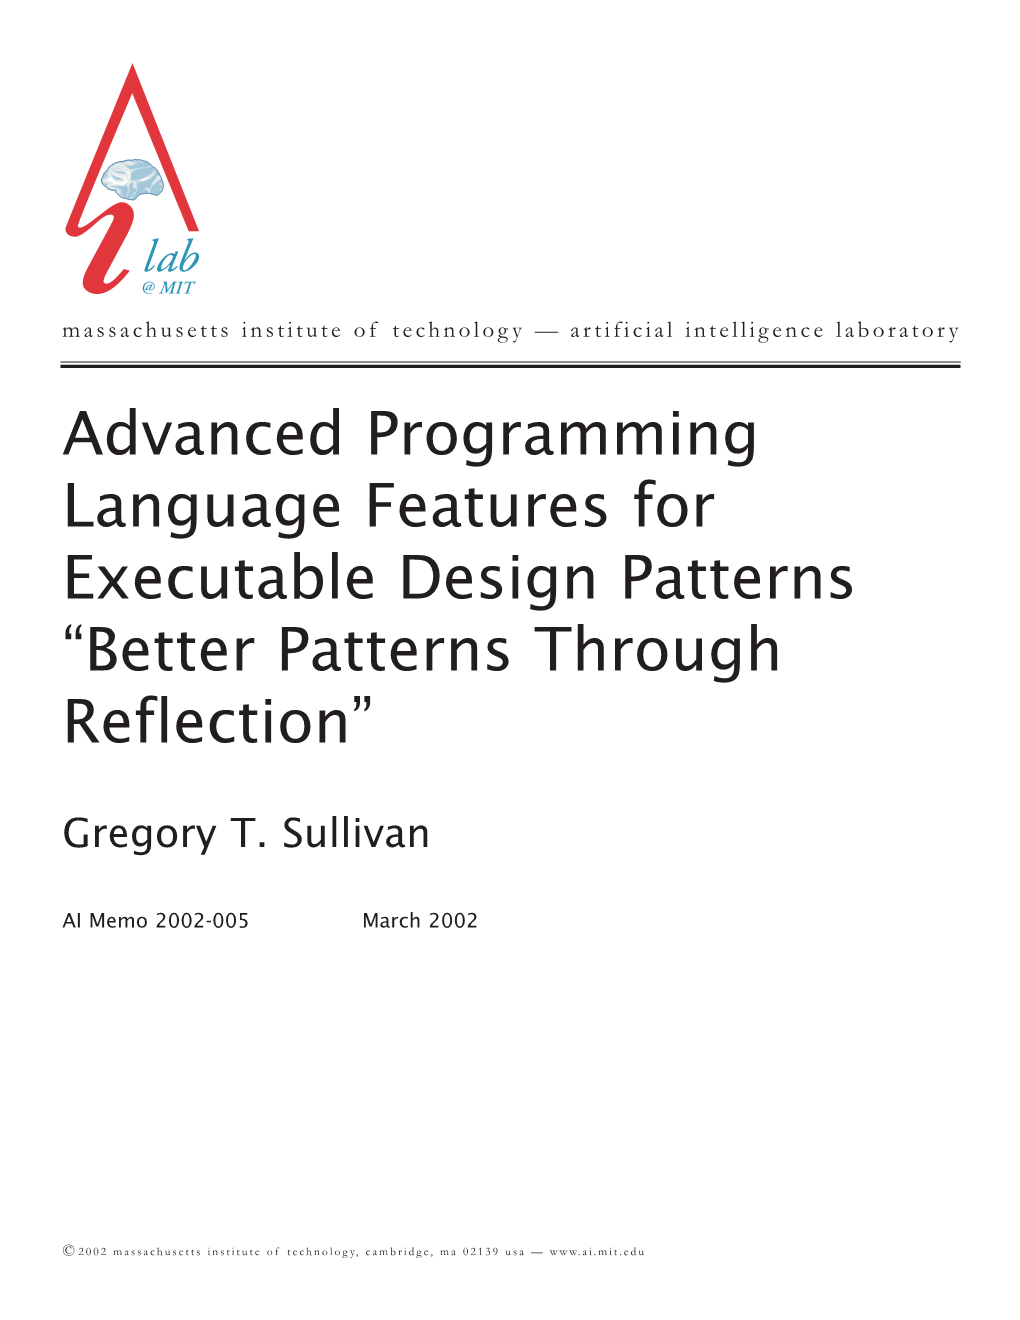 Advanced Programming Language Features for Executable Design Patterns “Better Patterns Through Reflection”